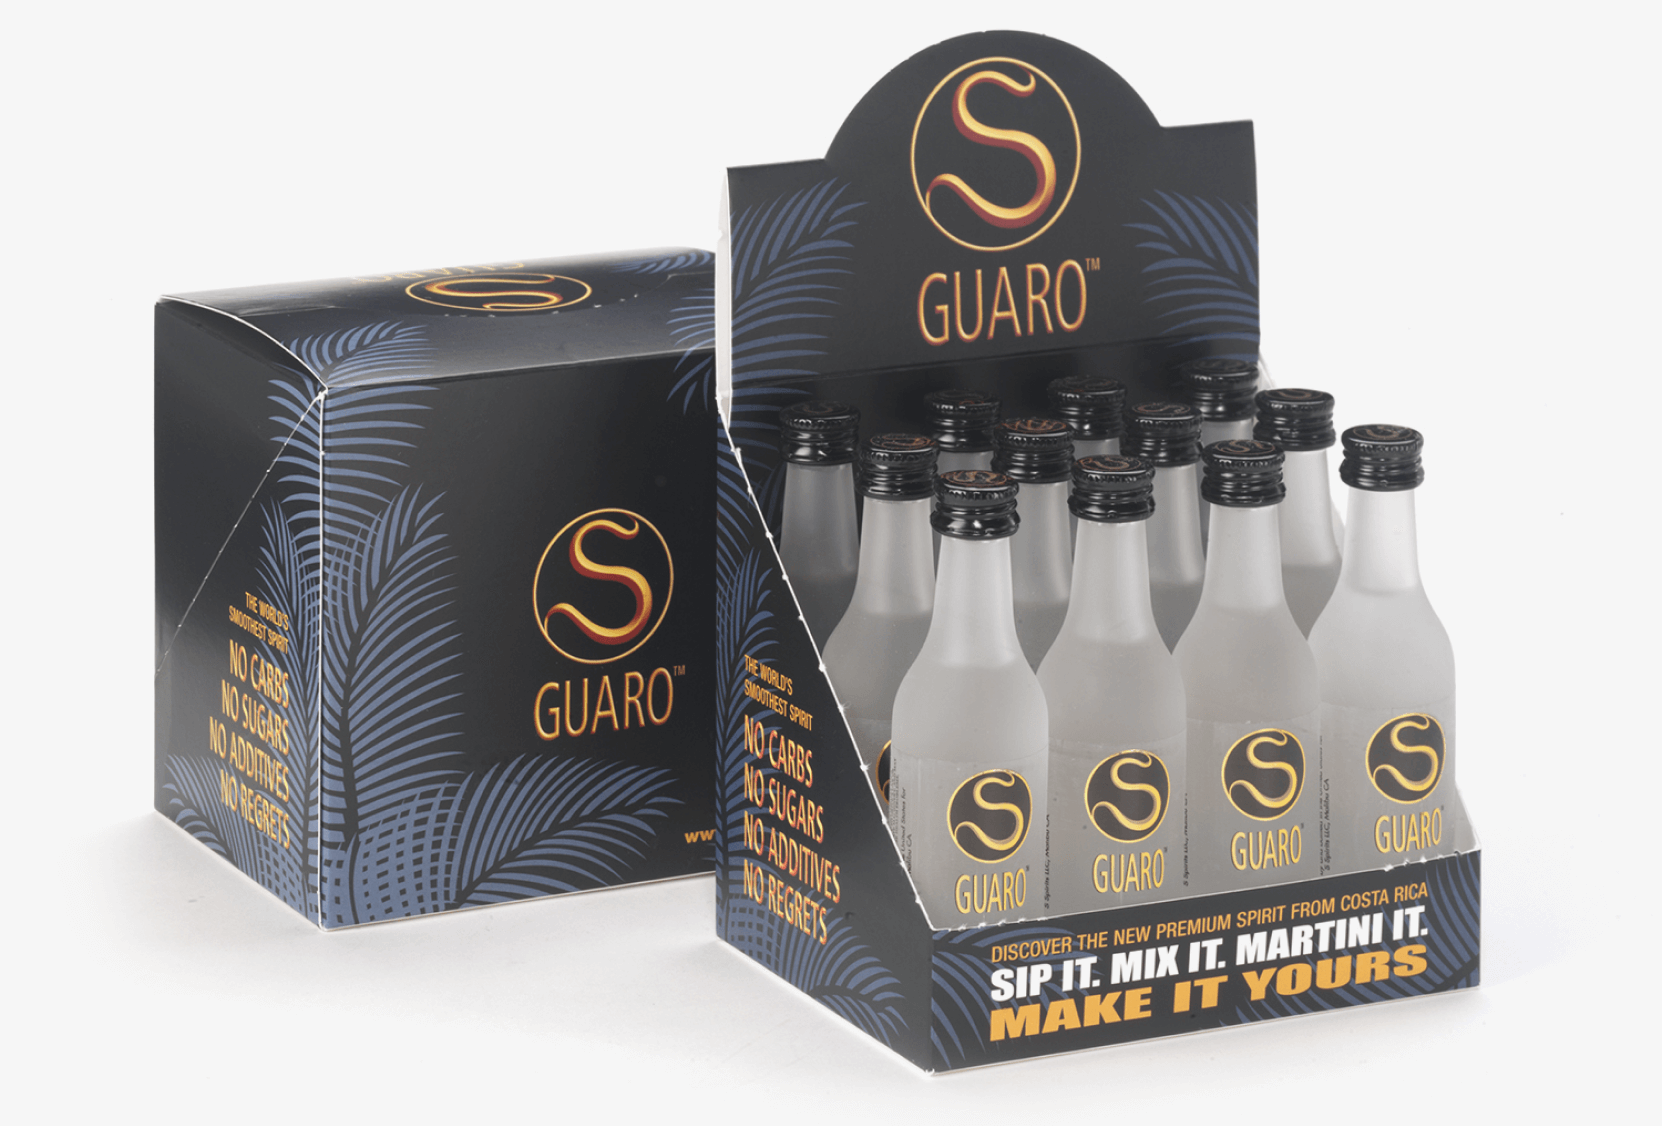 A box of sguardo bottles in front of a white background.